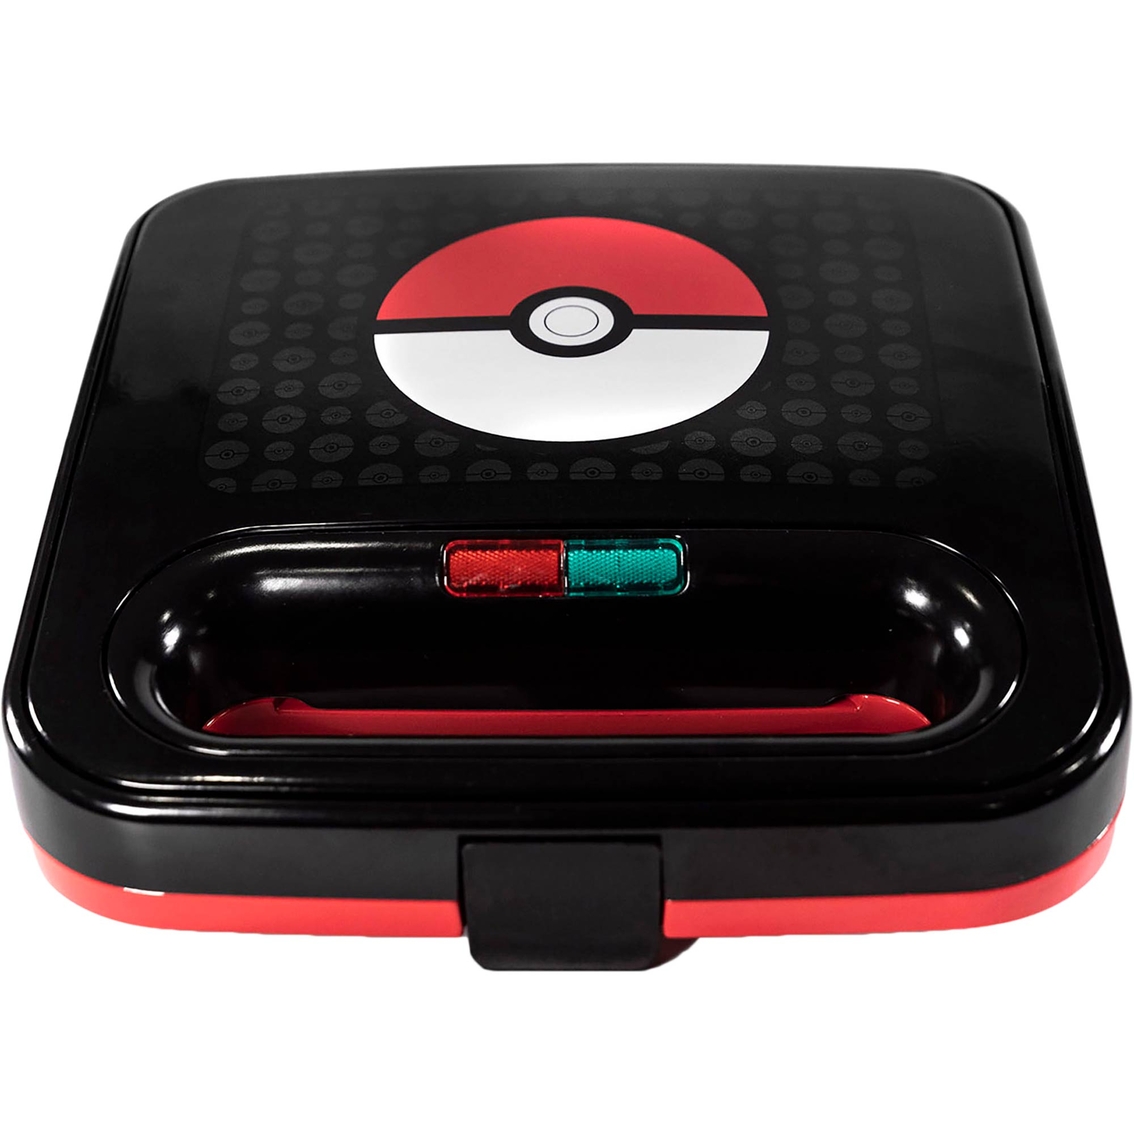 Pokemon Grilled Cheese Maker - Image 4 of 10